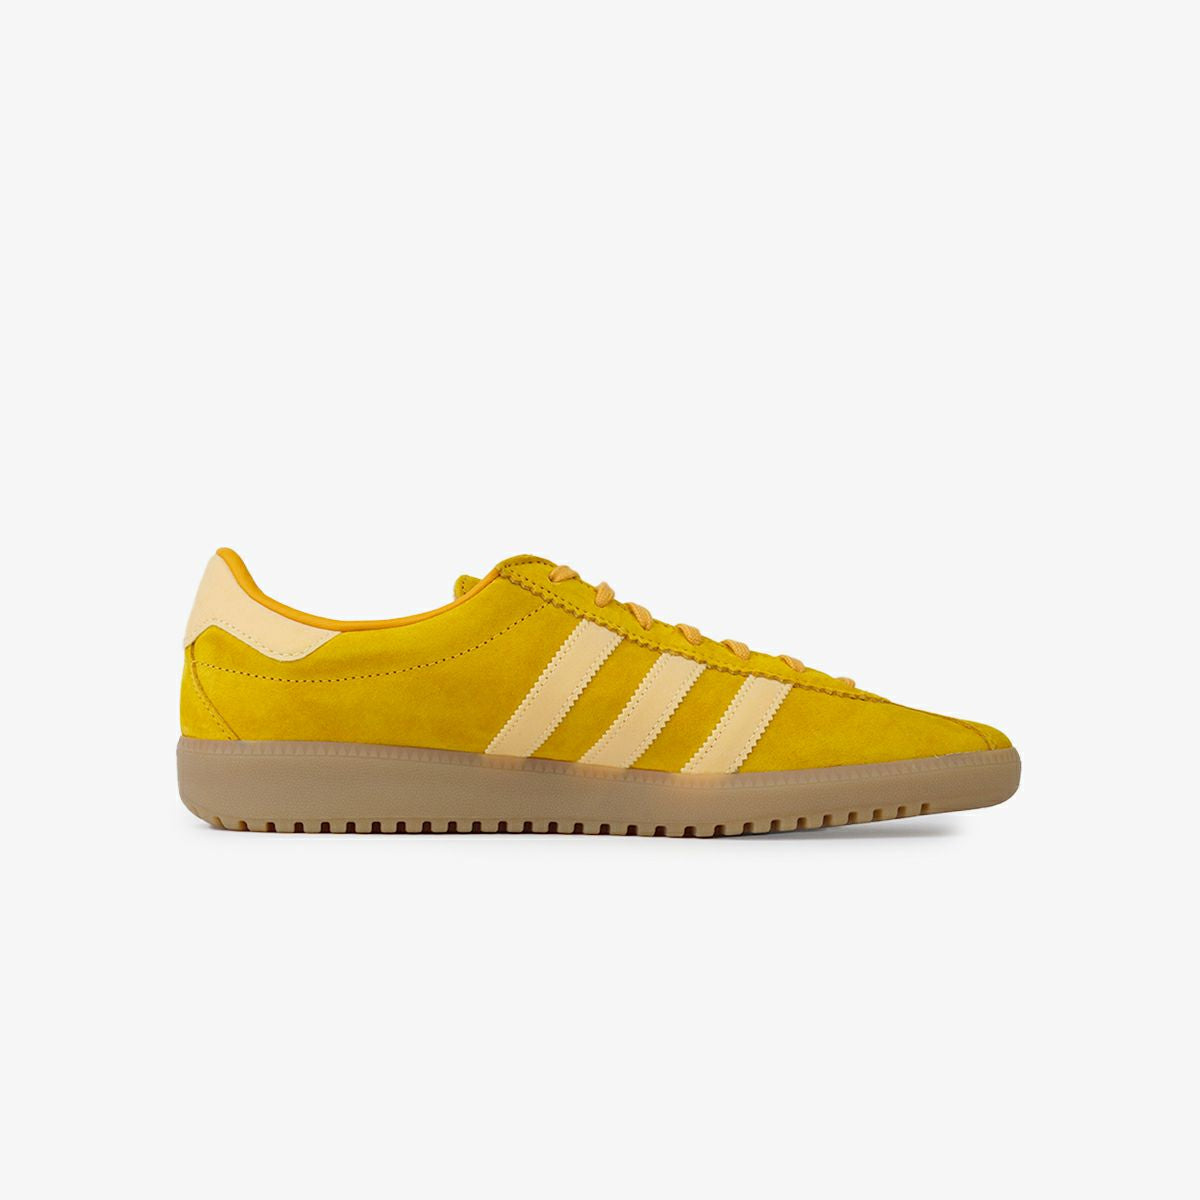 adidas BERMUDA BOLD GOLD/ALMOST YELLOW/PRE LOVED YELLOW id4574